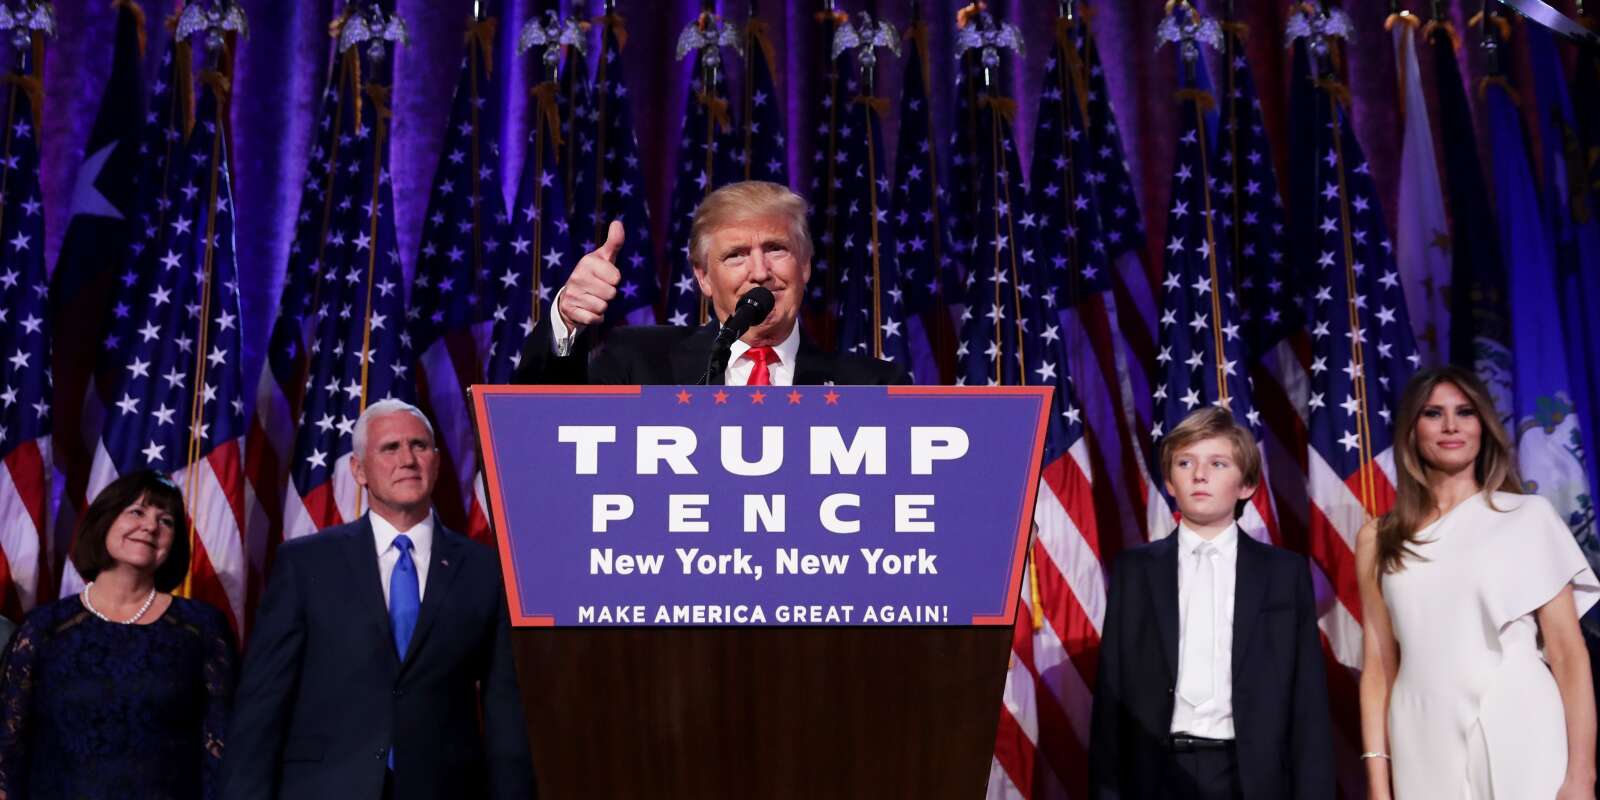 NEW YORK, NY - NOVEMBER 09: Republican president-elect Donald Trump delivers his acceptance speech during his election night event at the New York Hilton Midtown in the early morning hours of November 9, 2016 in New York City. Donald Trump defeated Democratic presidential nominee Hillary Clinton to become the 45th president of the United States. Chip Somodevilla/Getty Images/AFP == FOR NEWSPAPERS, INTERNET, TELCOS & TELEVISION USE ONLY ==